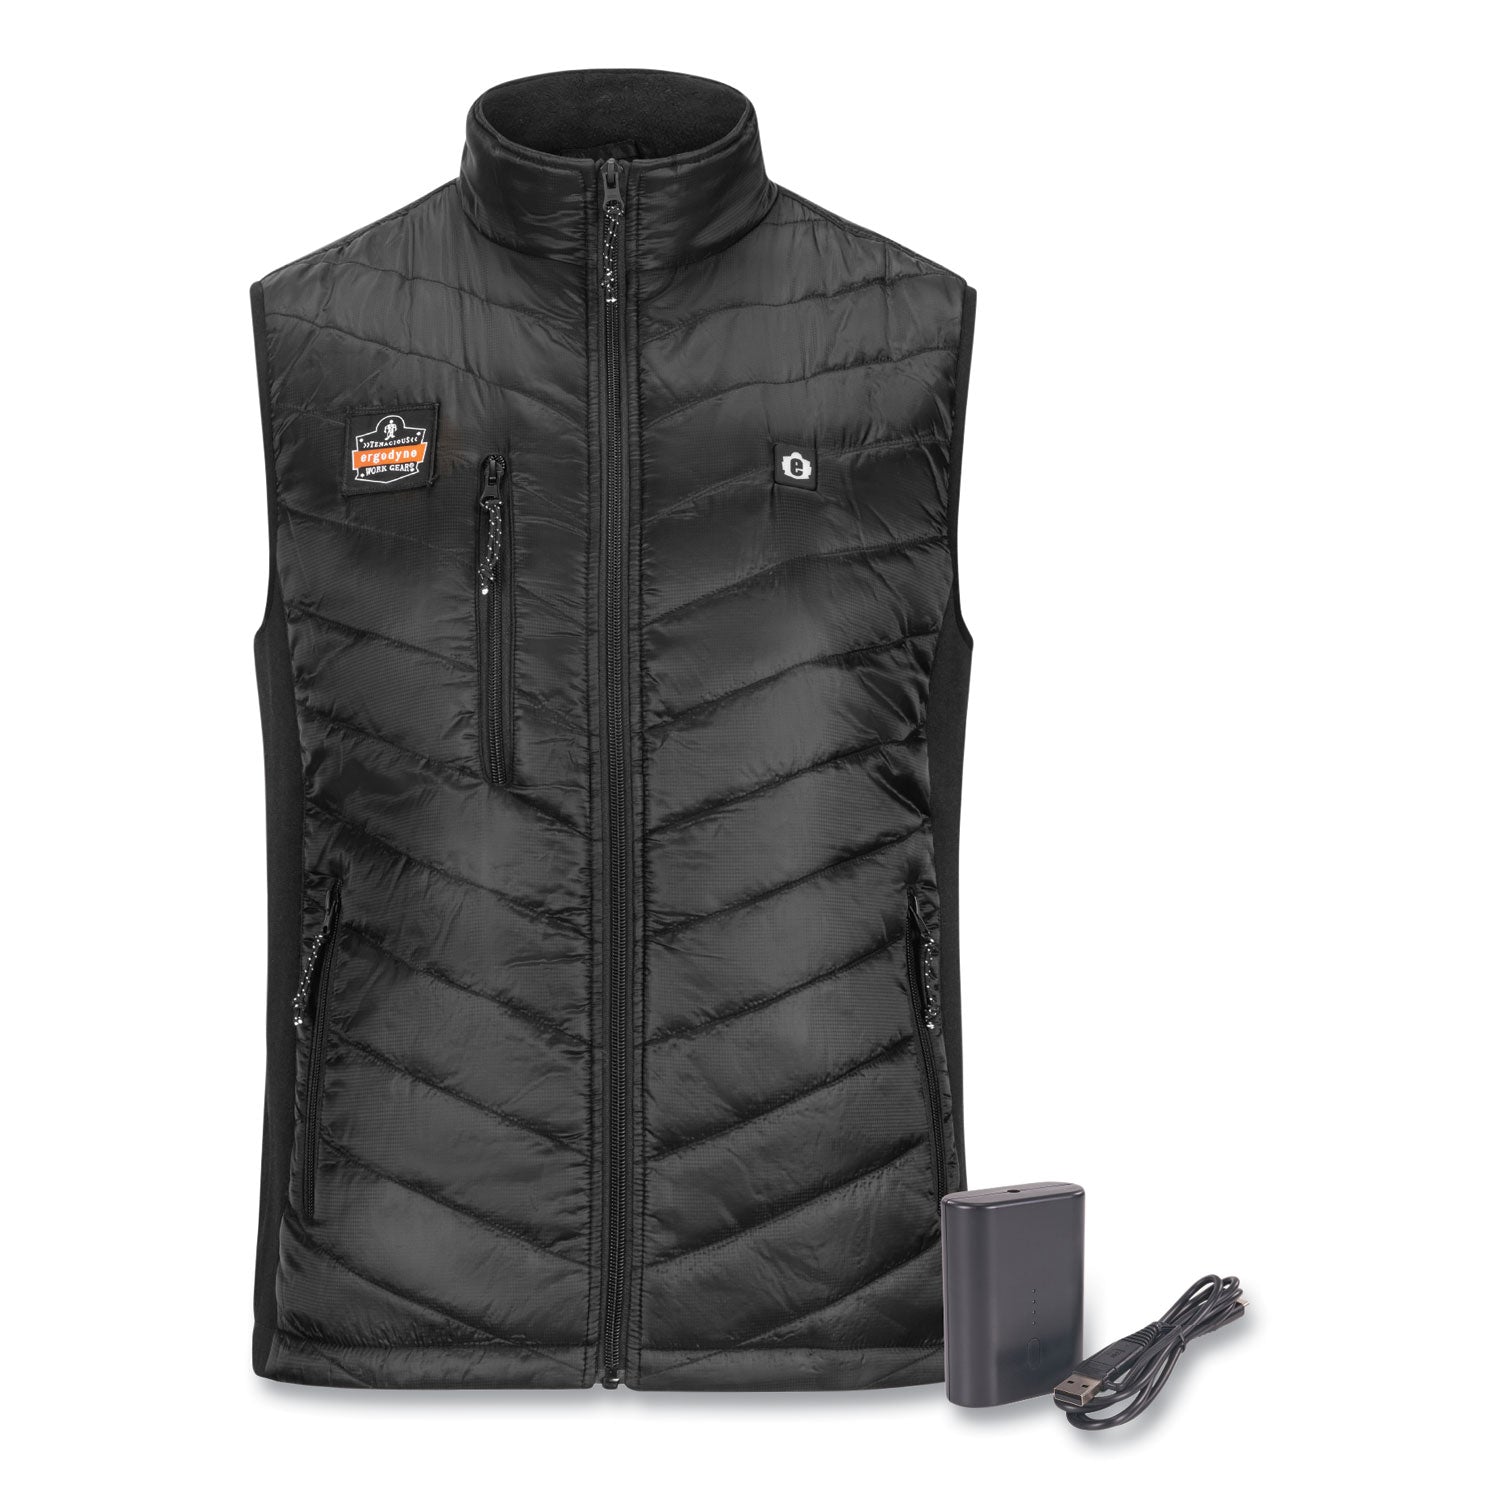 n-ferno-6495-rechargeable-heated-vest-with-battery-power-bank-fleece-polyester-2x-large-black-ships-in-1-3-business-days_ego41705 - 1